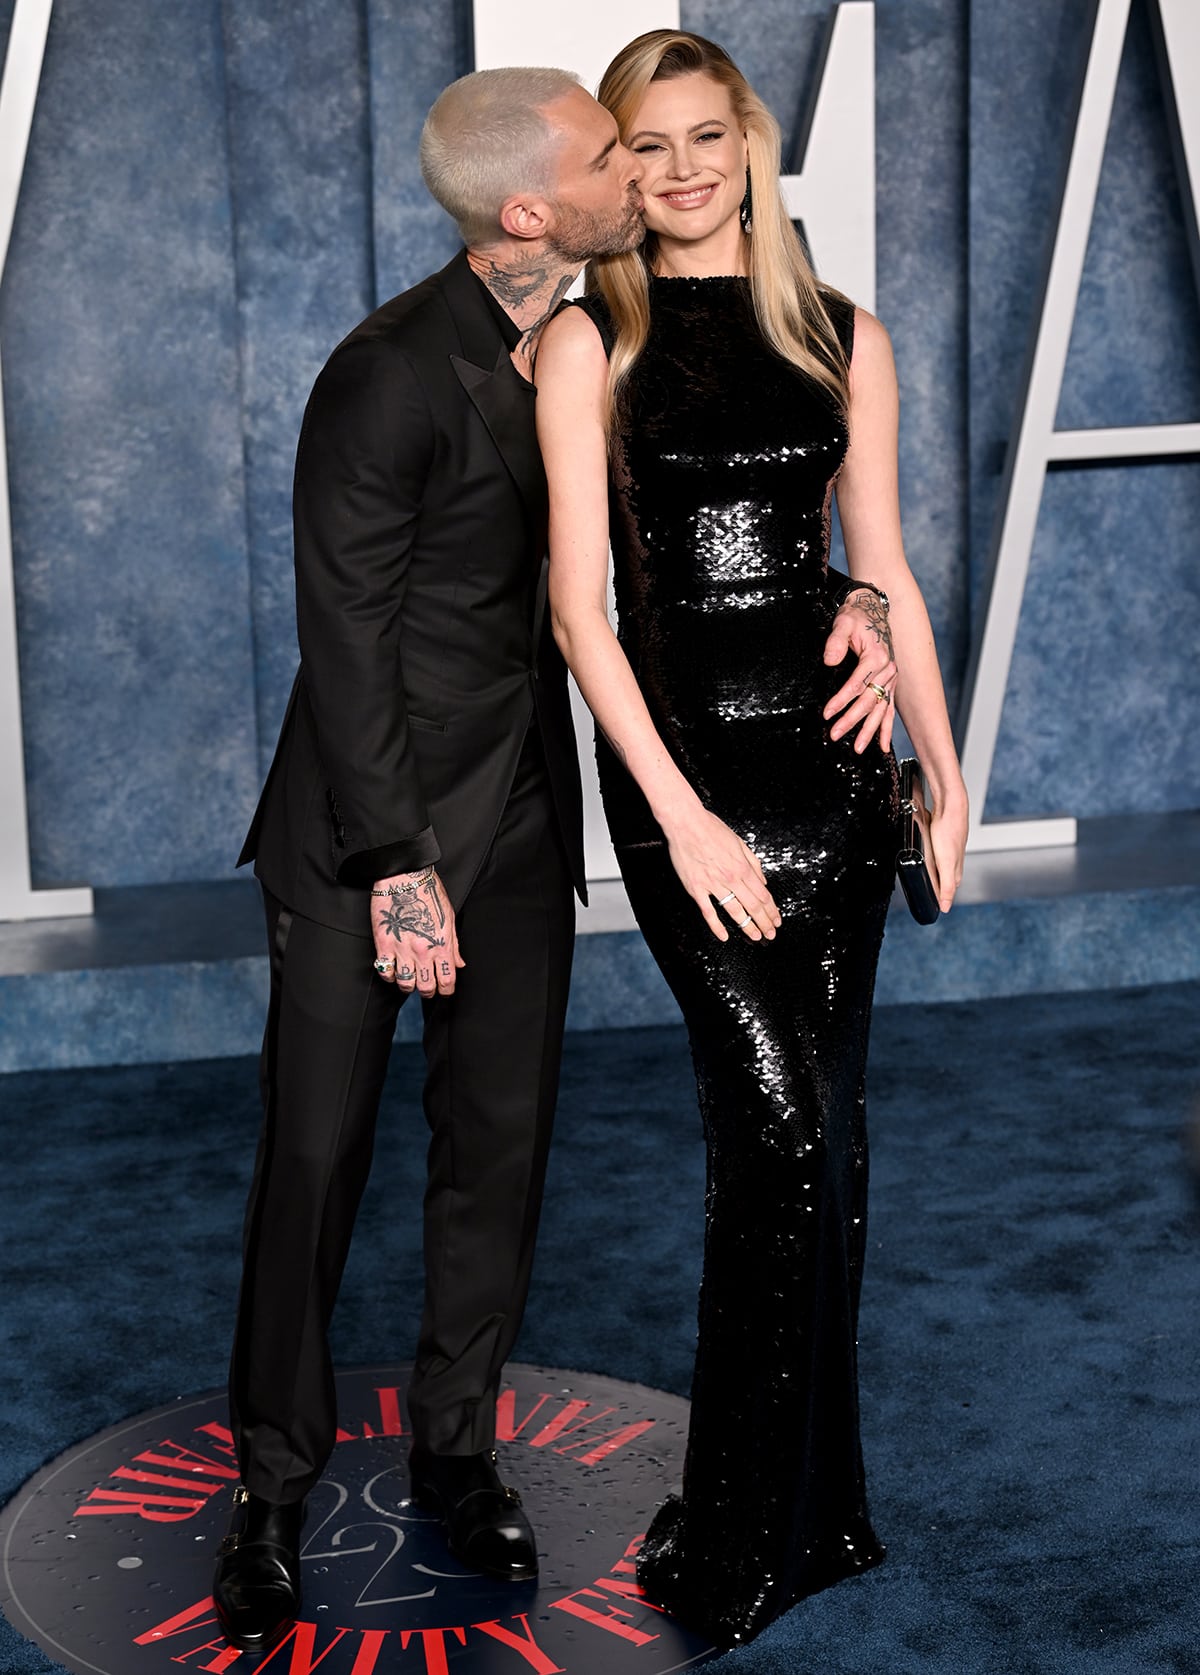 Adam Levine and Behati Prinsloo pack on the PDA in matching all-black outfits at the 2023 Vanity Fair Oscars After-Party on March 12, 2023